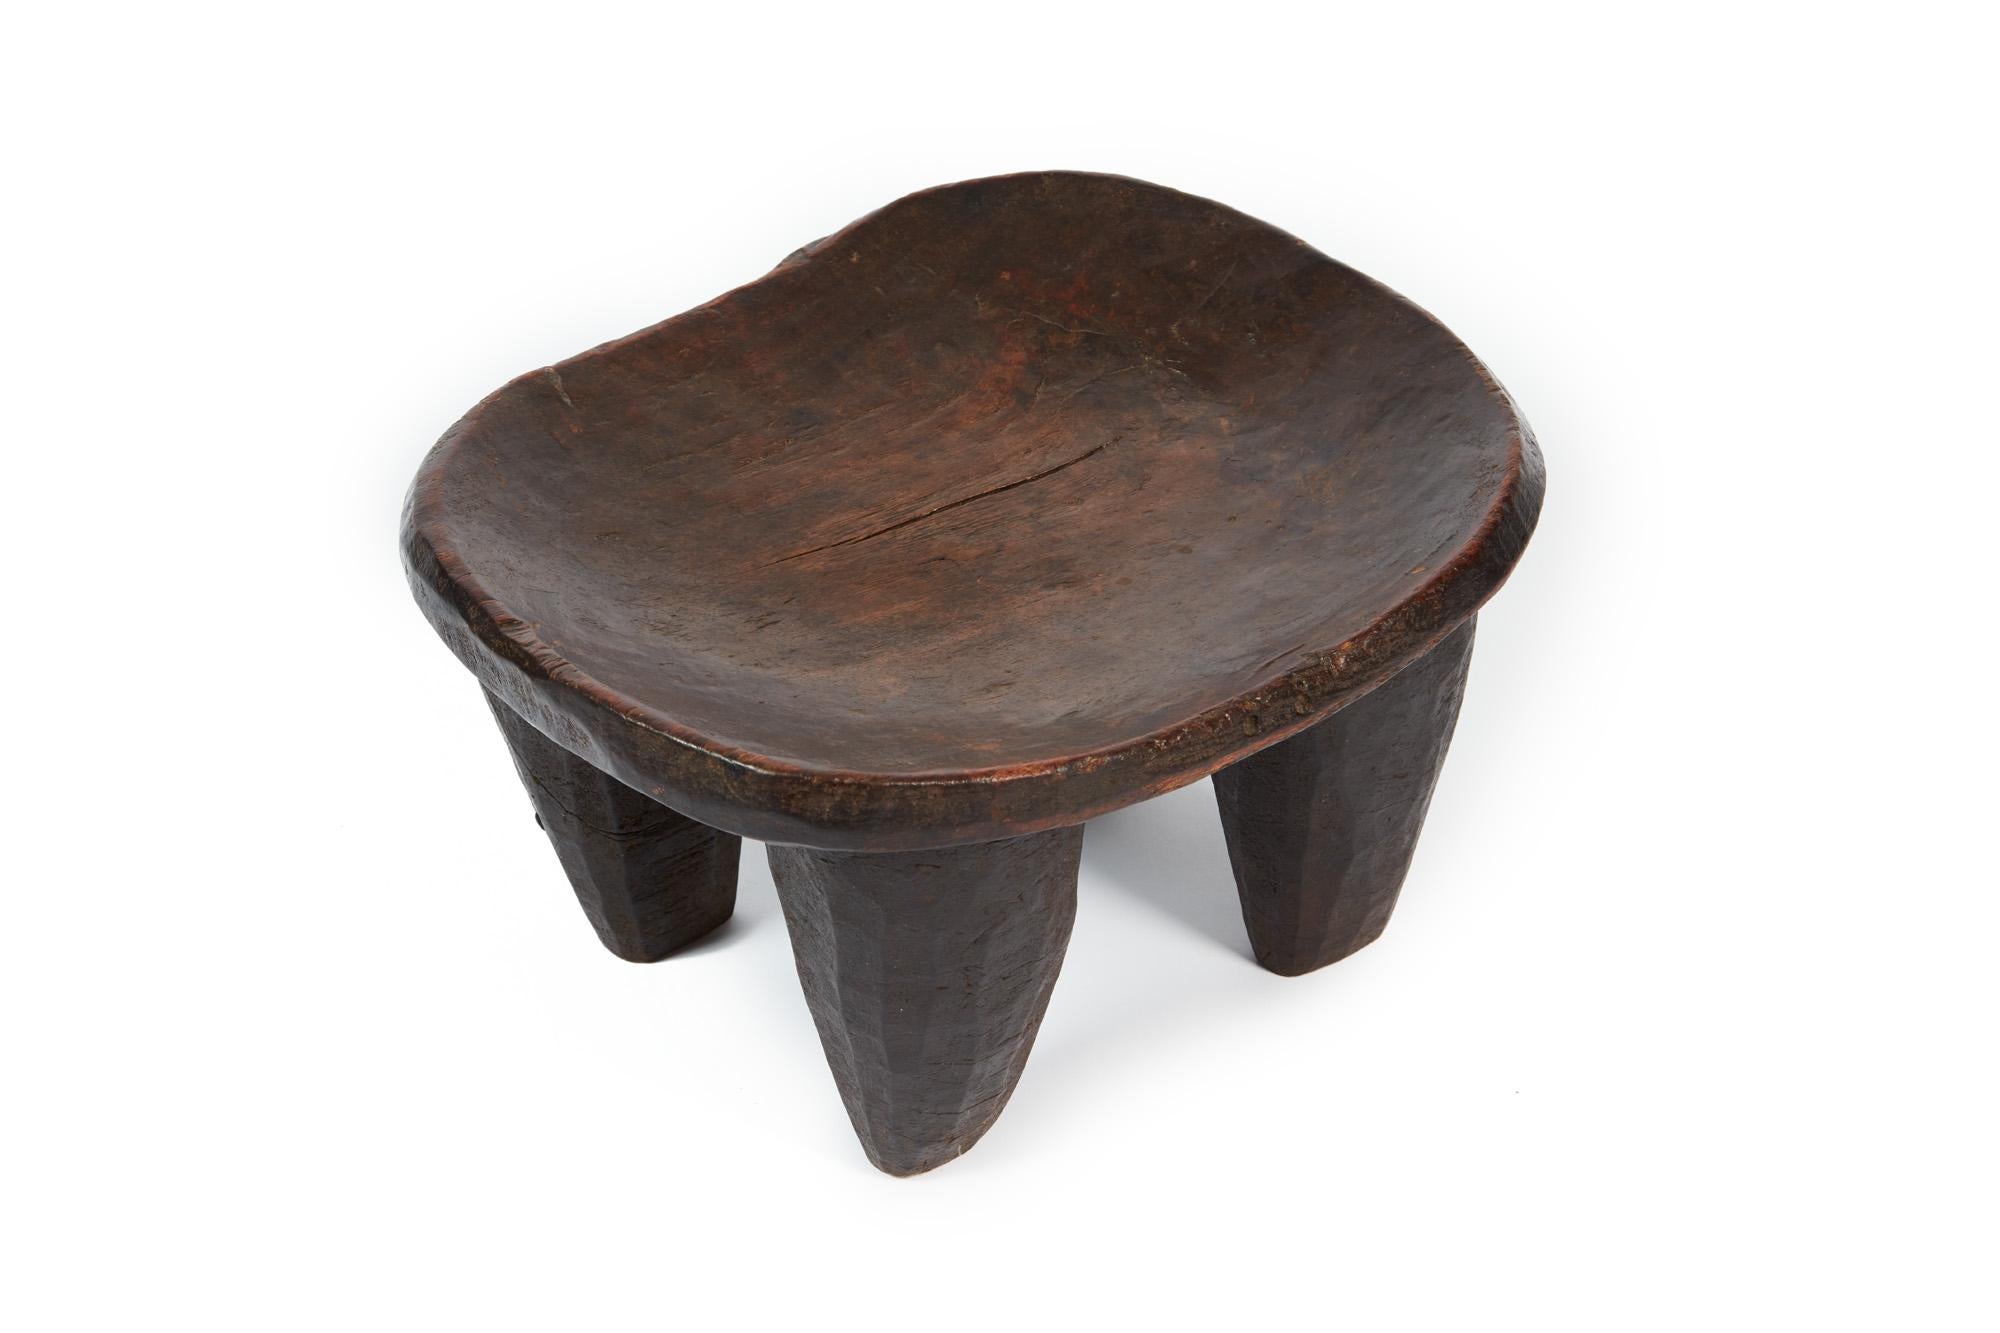 Ancient wooden stool with four feet dating to the 19th century. From Congo, Africa.
Provenance: Galerie Démons et Merveilles, Paris; Private Collection, United Kingdom.